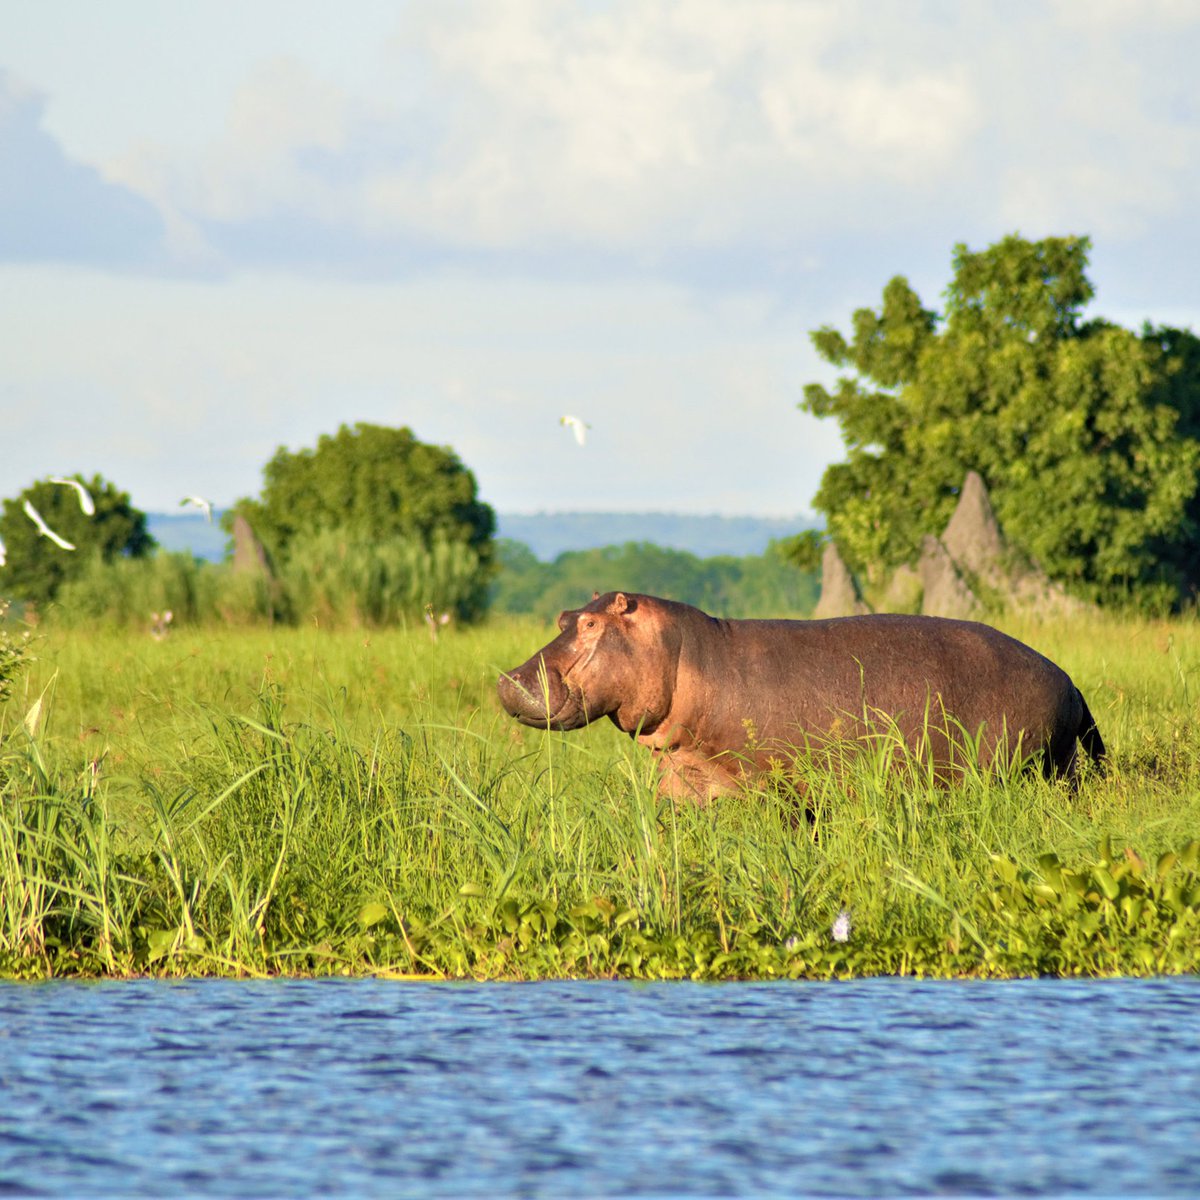 Check out our wildlife guide to #Malawi, Africa's unsung safari destination. wanderlust.co.uk/content/malawi… Malawi’s wildlife parks and reserves offer not just incredible encounters away from the thunder of mass tourism, but hope for the future of conservation in Africa.